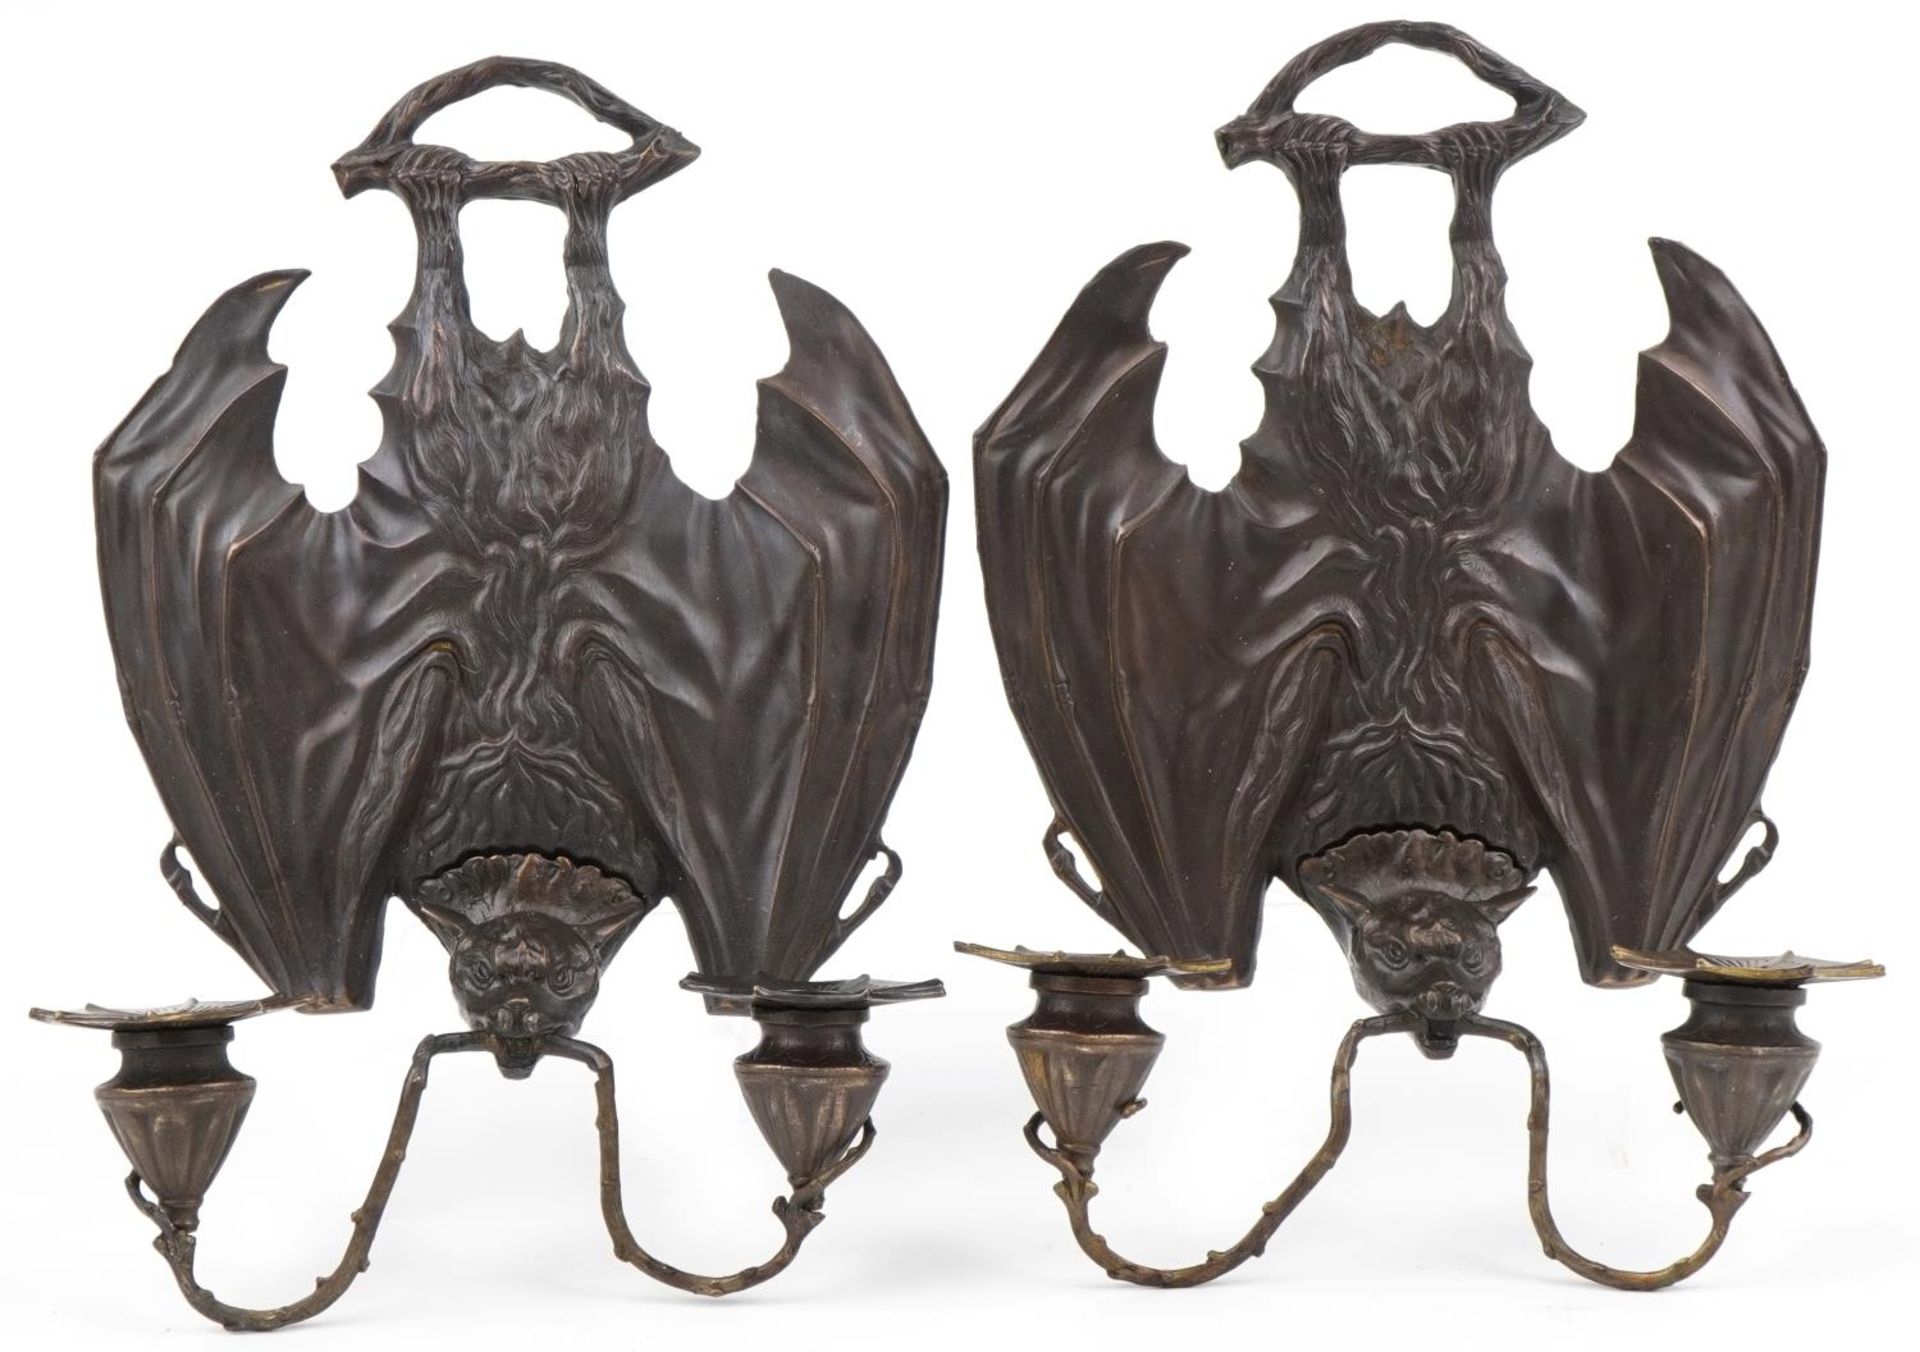 Pair of Art Nouveau style patinated bronze bat design wall sconces, 35cm high : For further